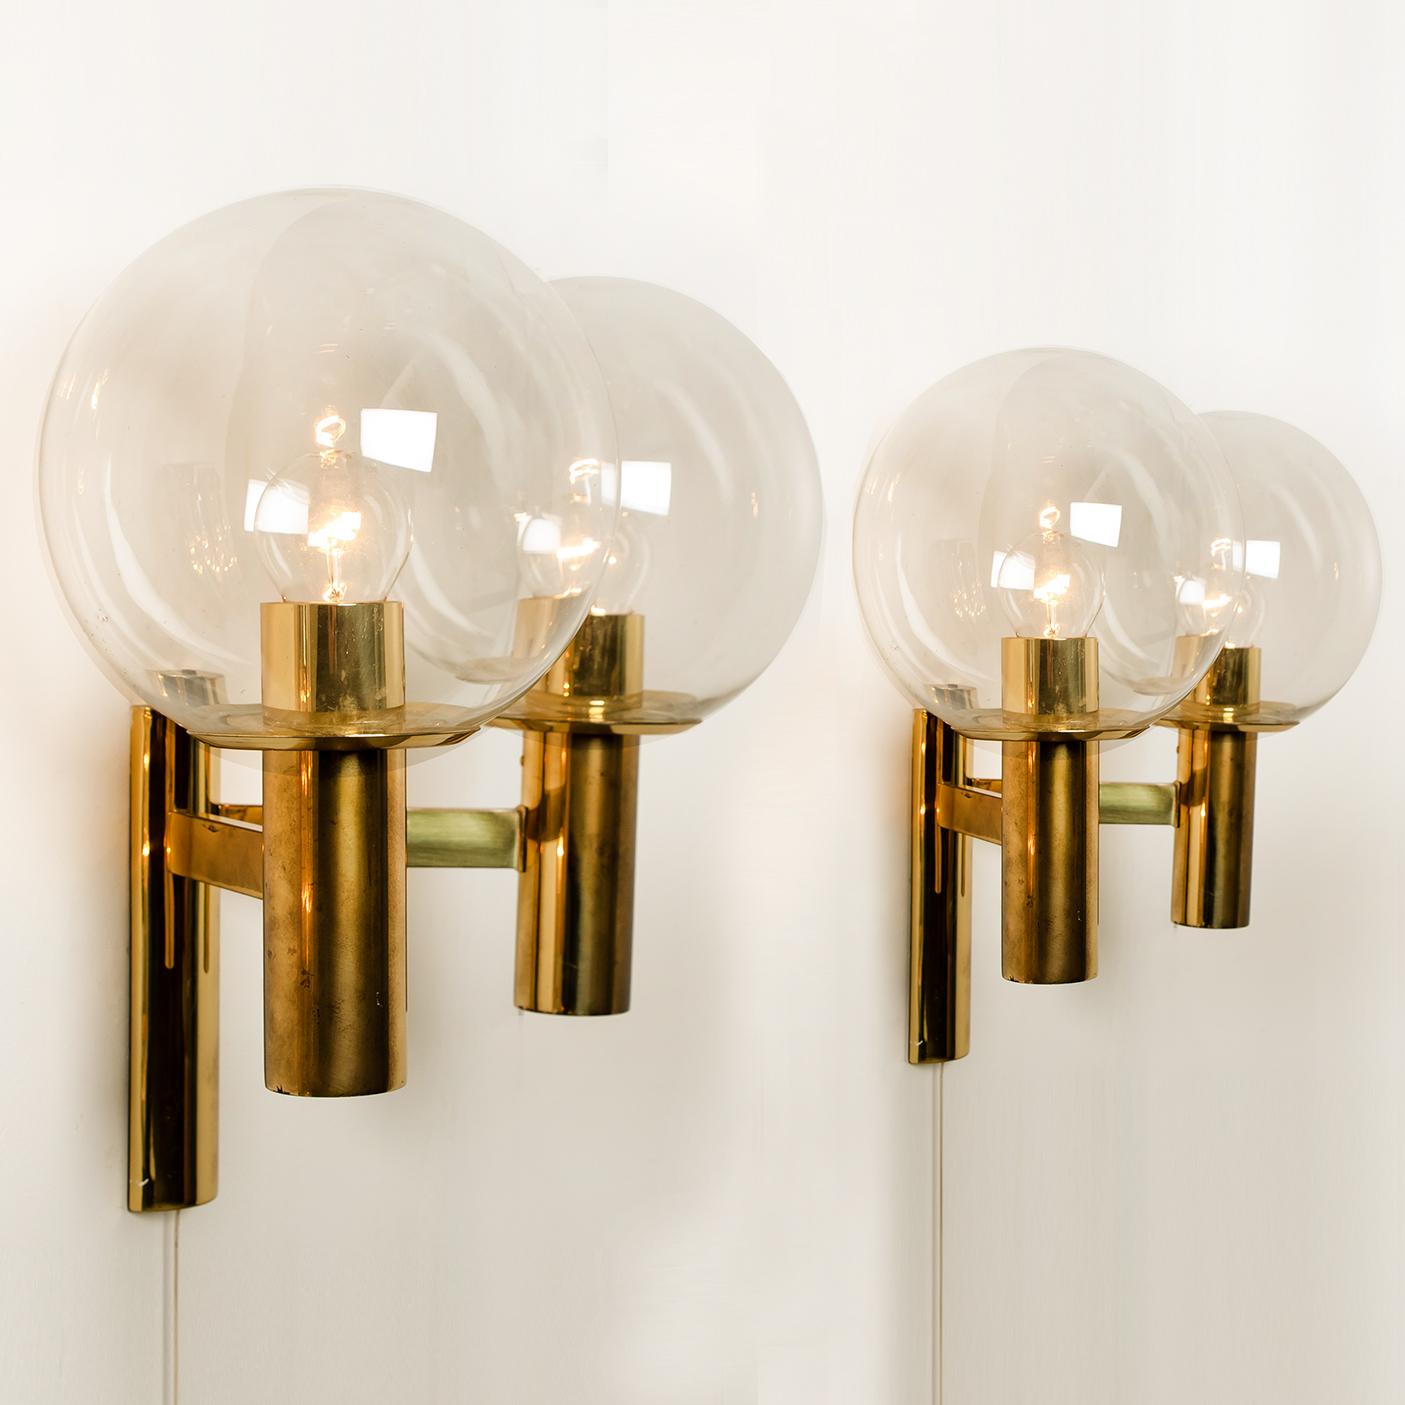 Mid-Century Modern Pair of Wall Lights the Style of Hans-Agne Jacobsson, Schweden, 1960